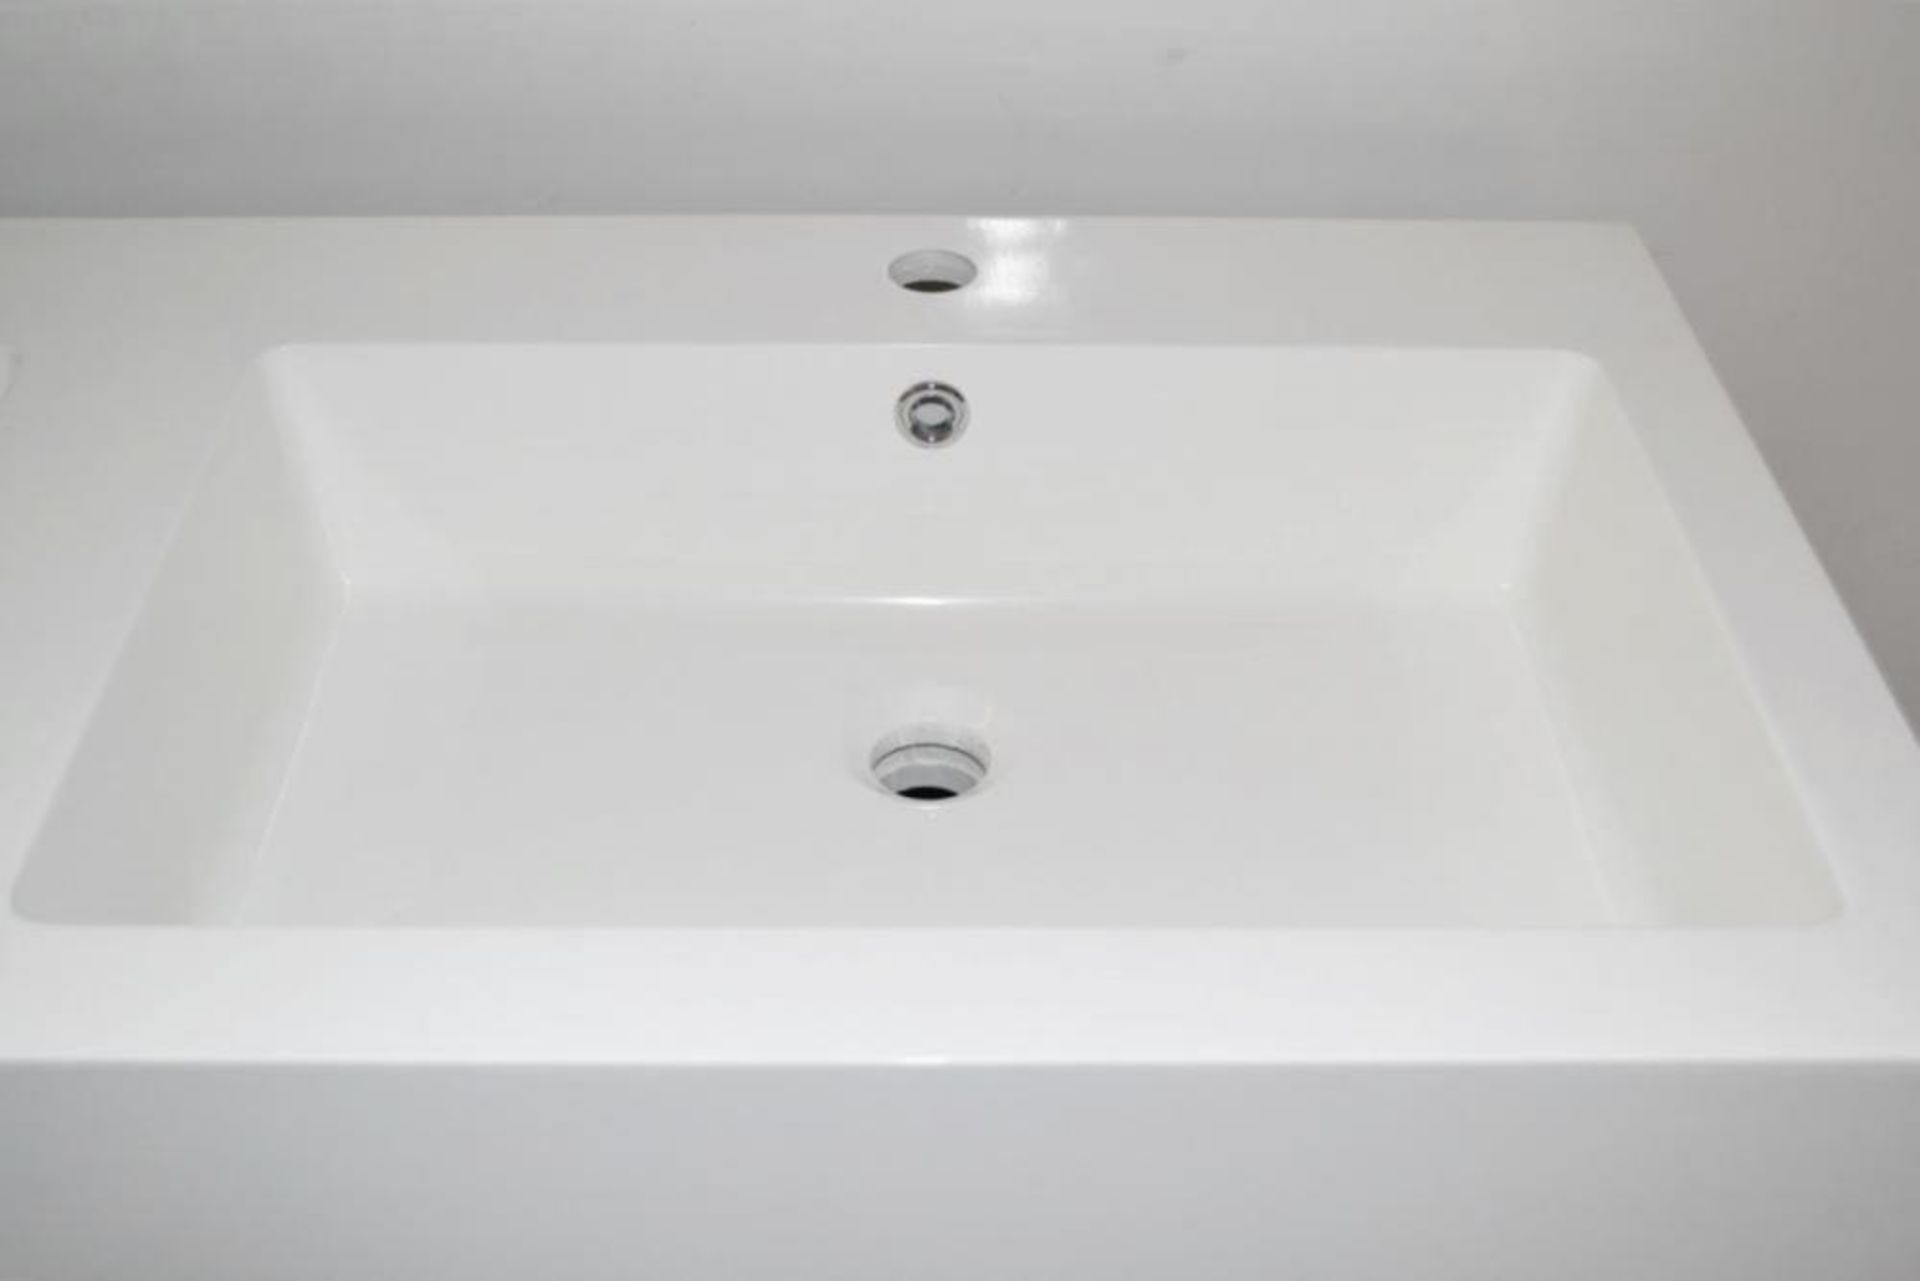 1 x His & Hers Double Bathroom Vanity Unit - 1200mm Wide - Features a High Gloss White Finish and So - Image 5 of 7